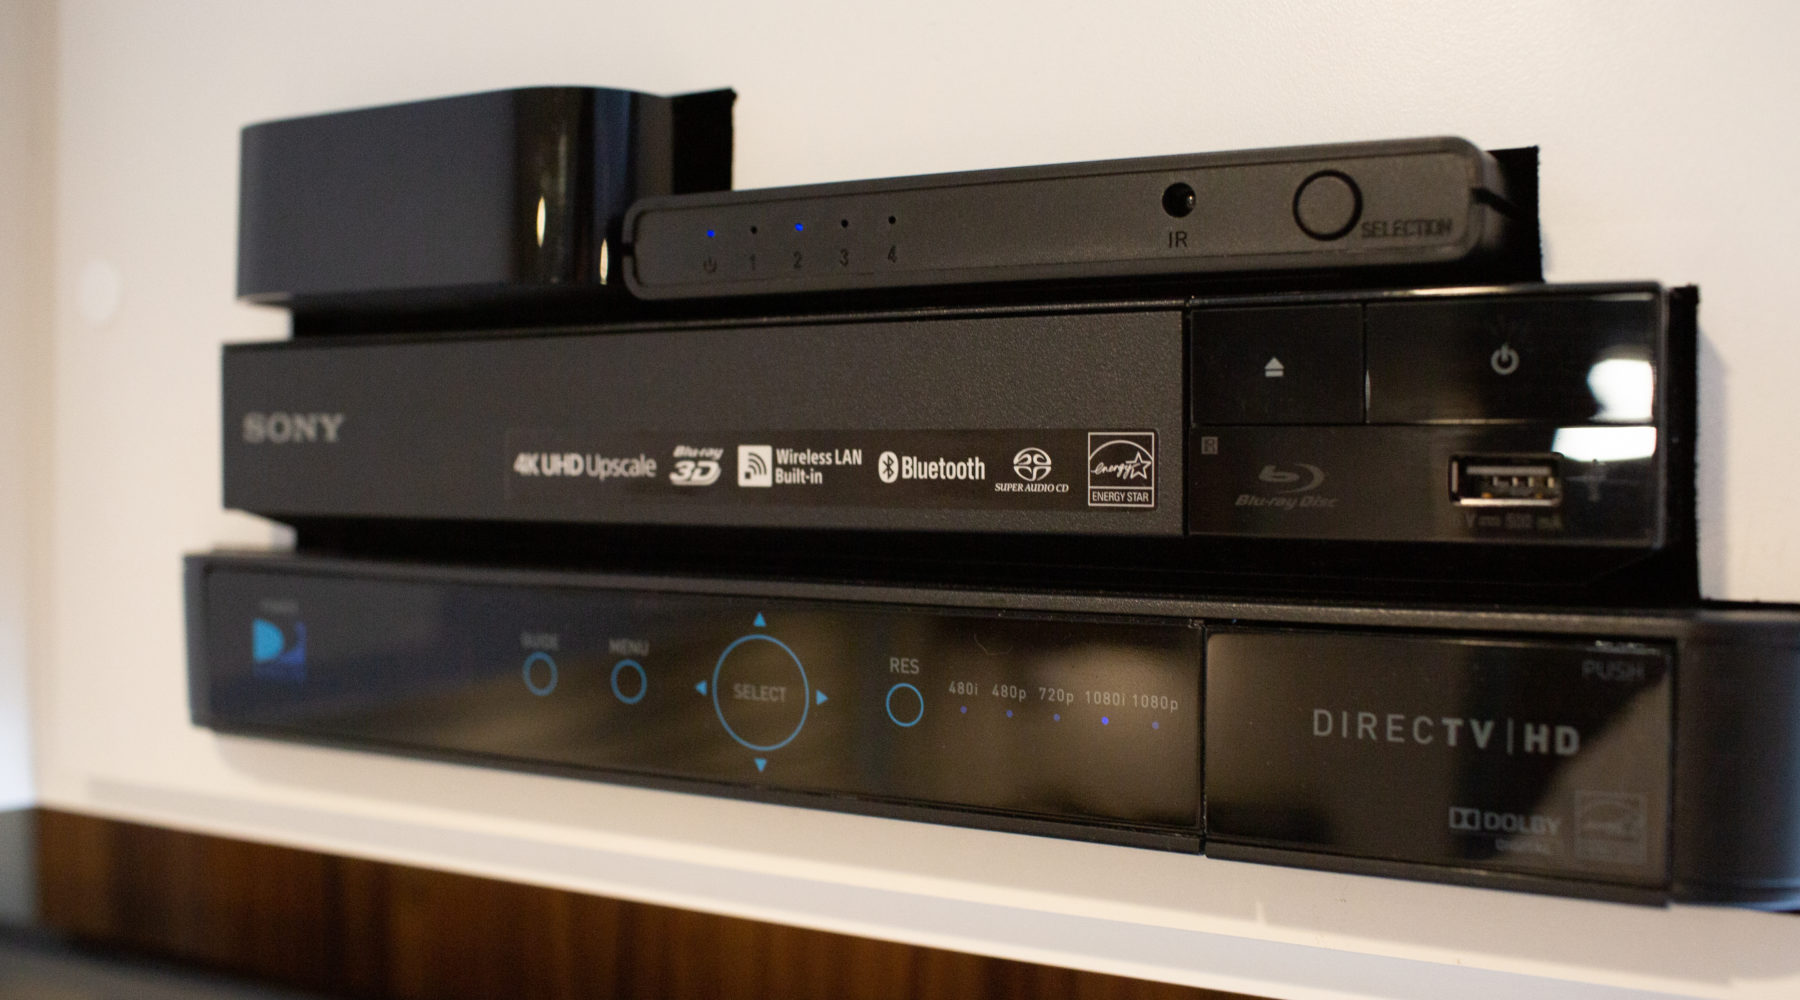 Sony BluRay Player, Apple TV, and DirecTV Satellite Receiver in Custom Cabinet